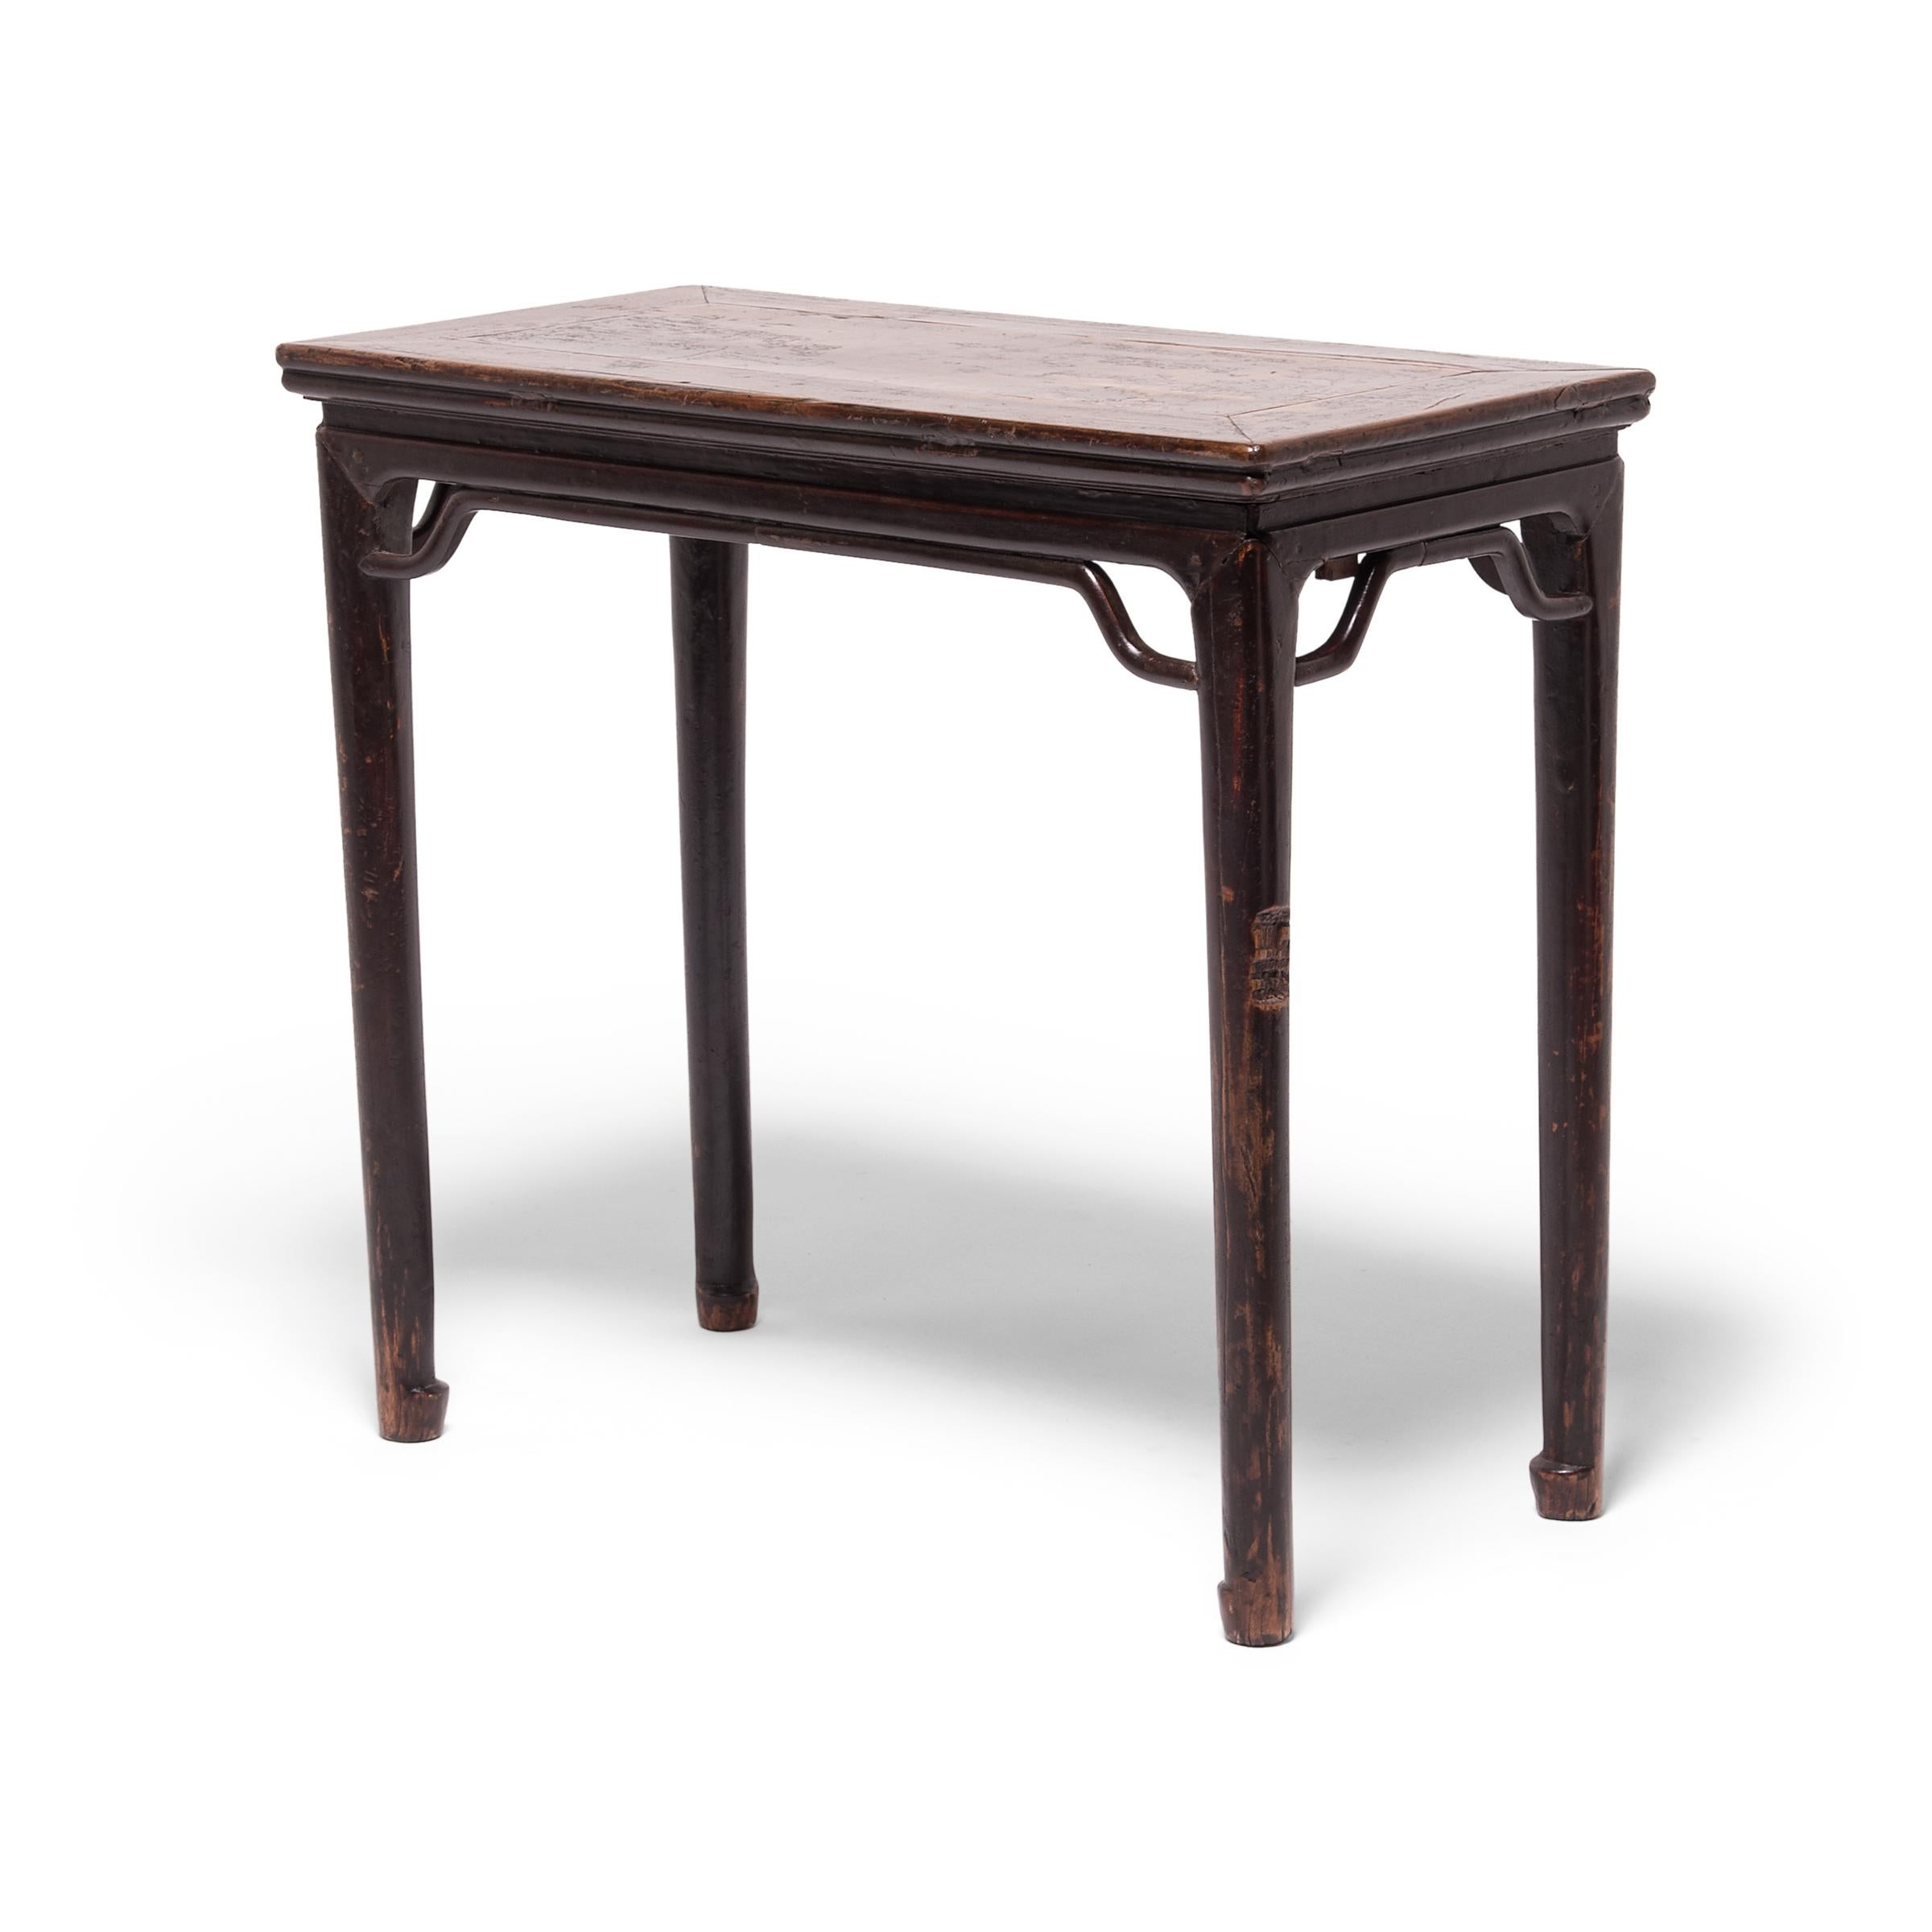 Crafted of dark brown walnut, a wood prized for its open-grained texture and warm tones, this 19th-century wine table expresses the refined forms of Ming-dynasty furniture. With clean lines and a dark lacquer finish, the table's streamlined form